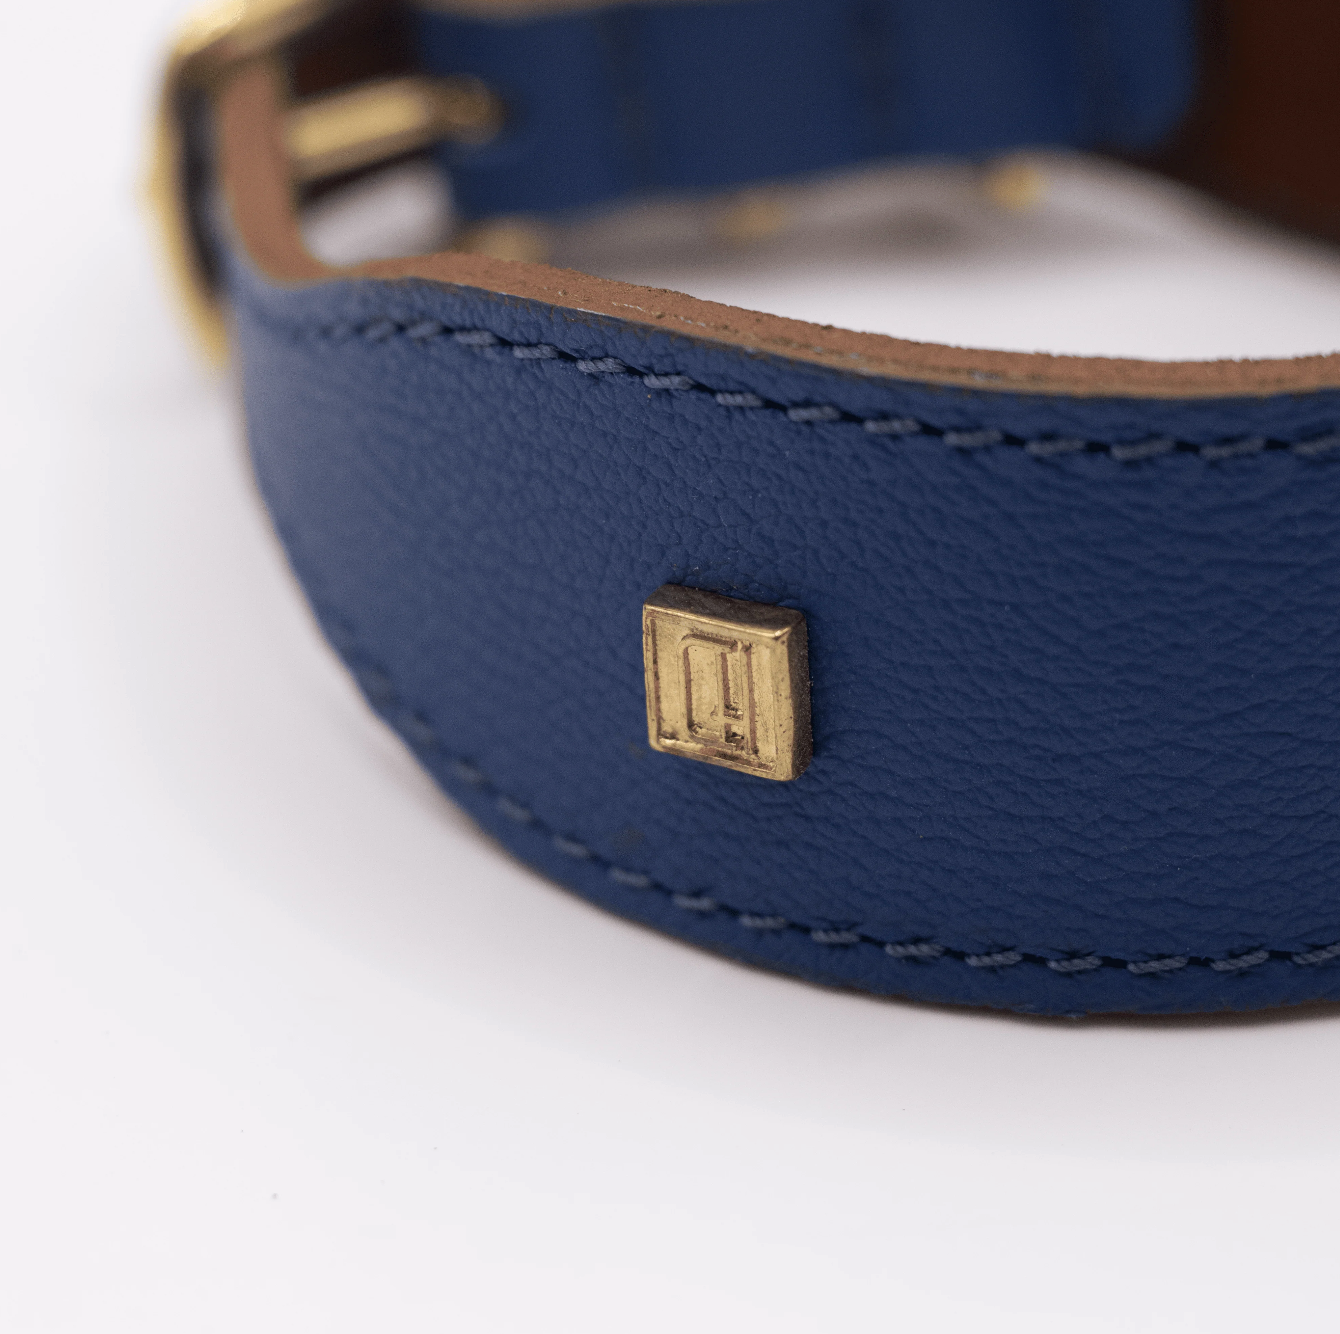 Flat and Wider Soft Leather Dog Collar Electric Blue